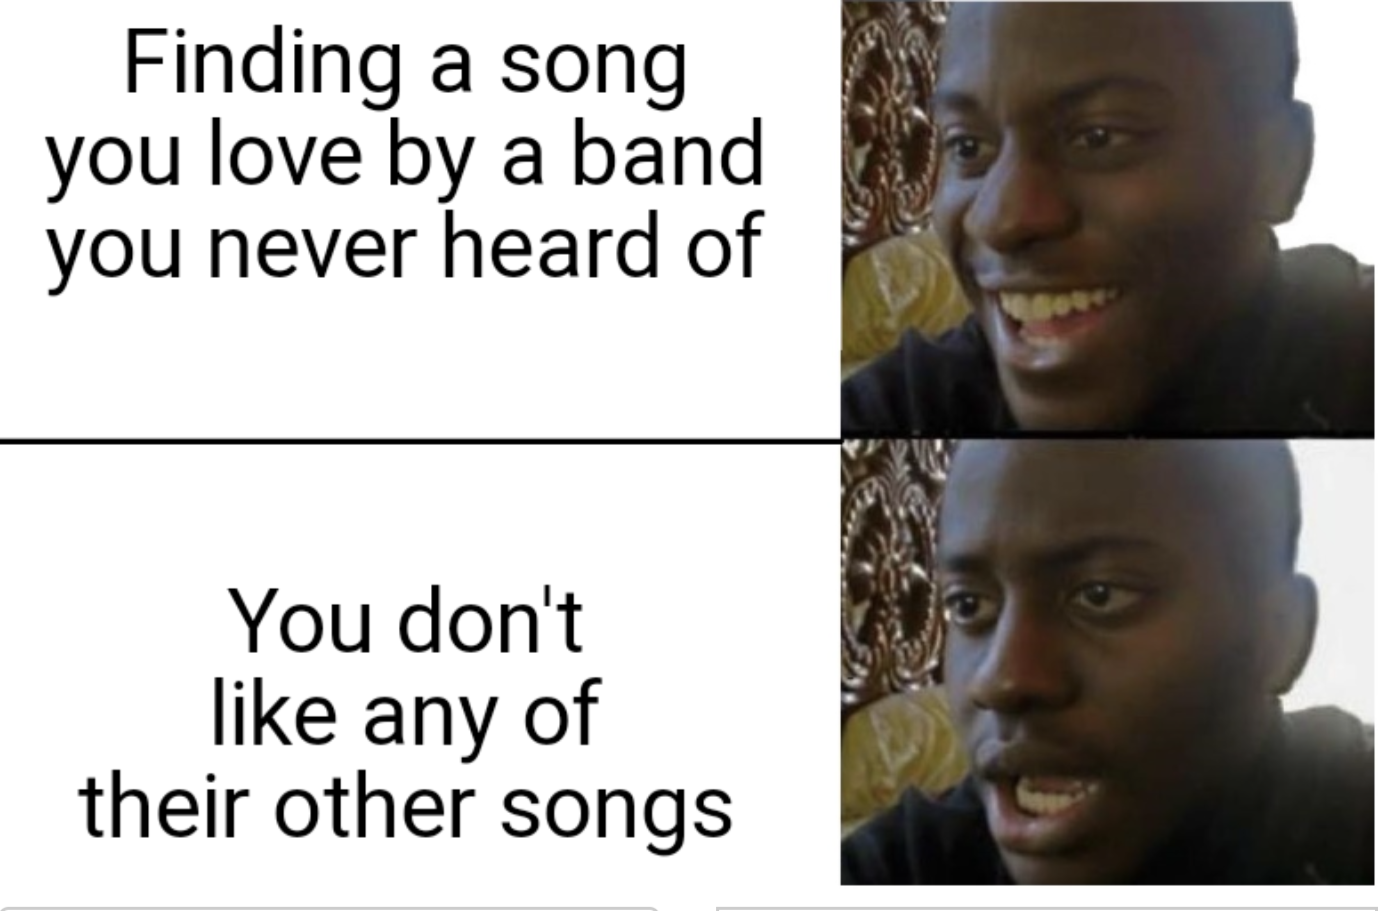 gaming memes - andrew jackson meme - Finding a song you love by a band you never heard of You don't any of their other songs